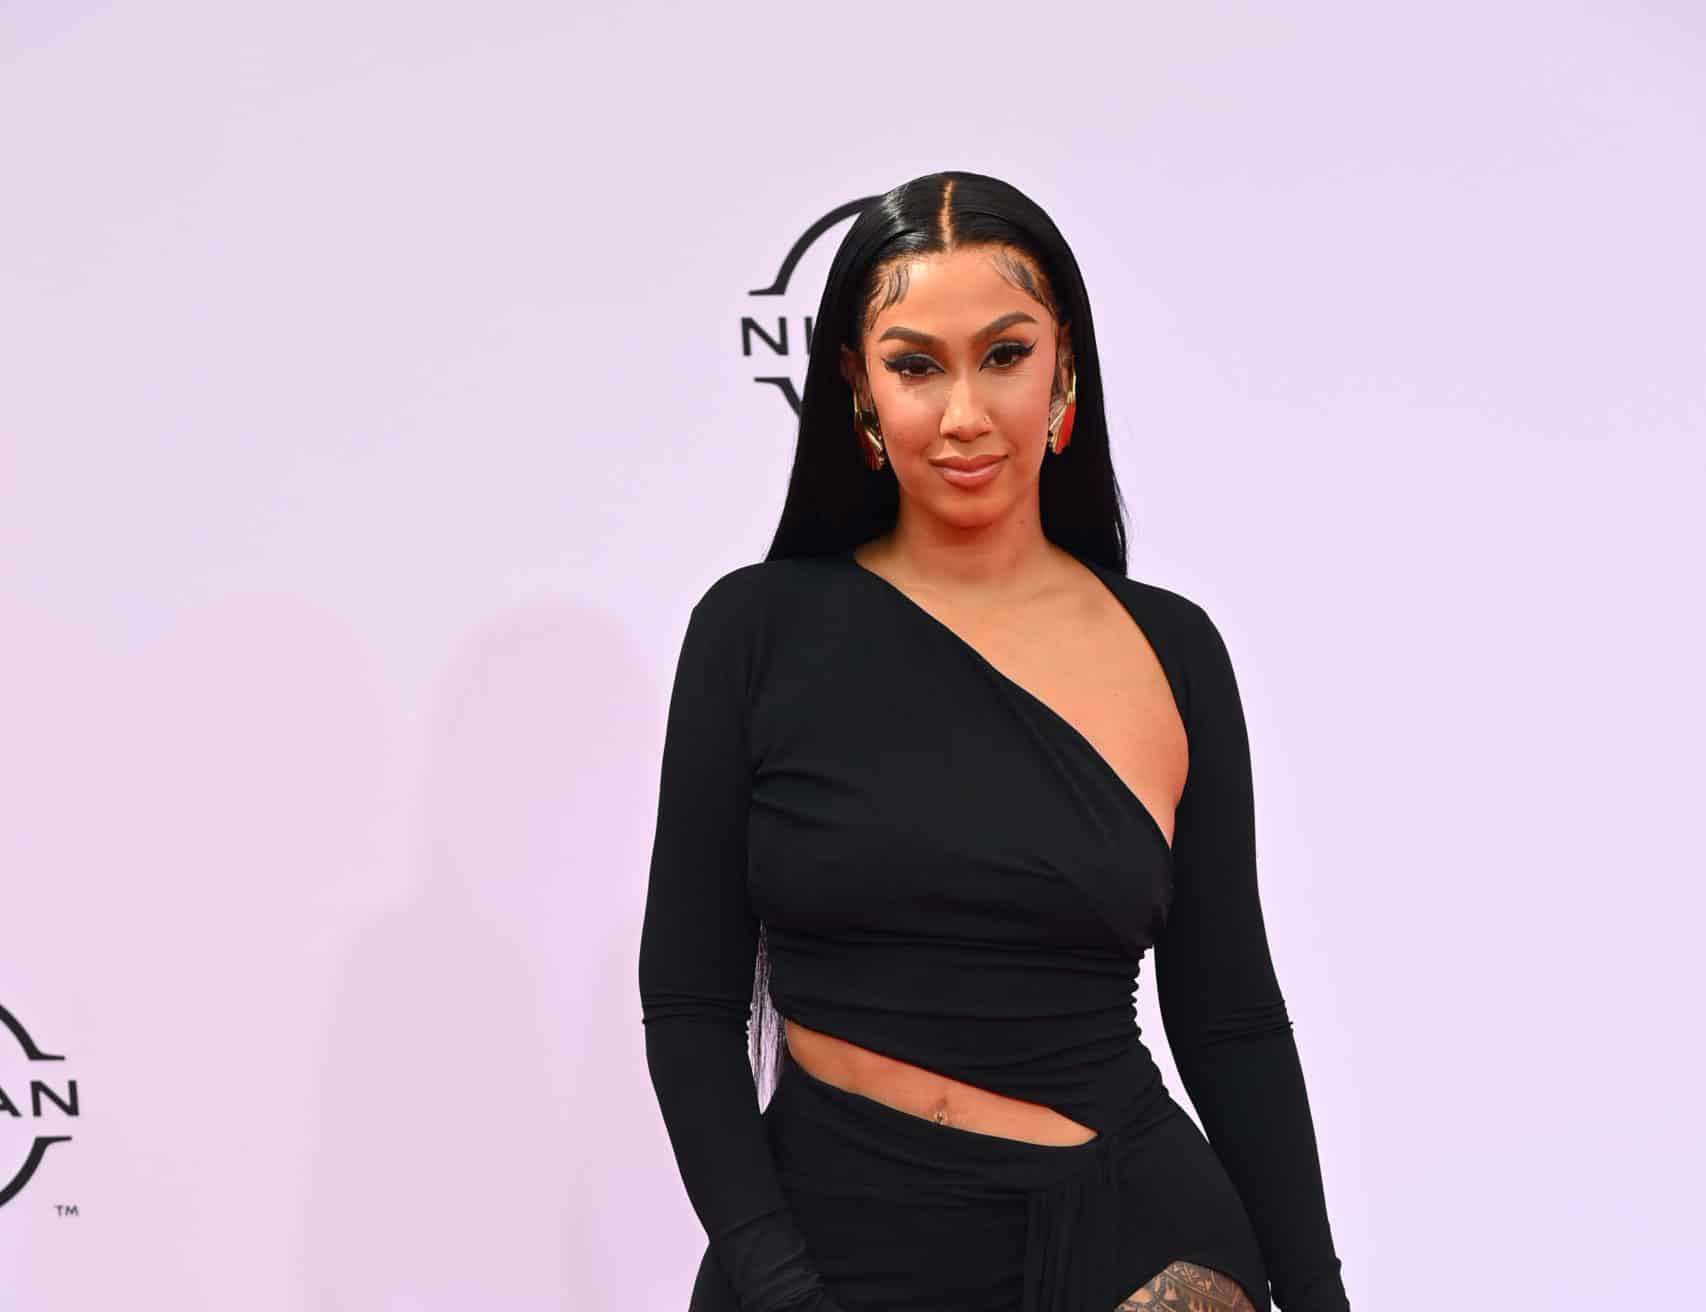 Queen Naija Gives Inside Look At How She Creates Her R&B Hits